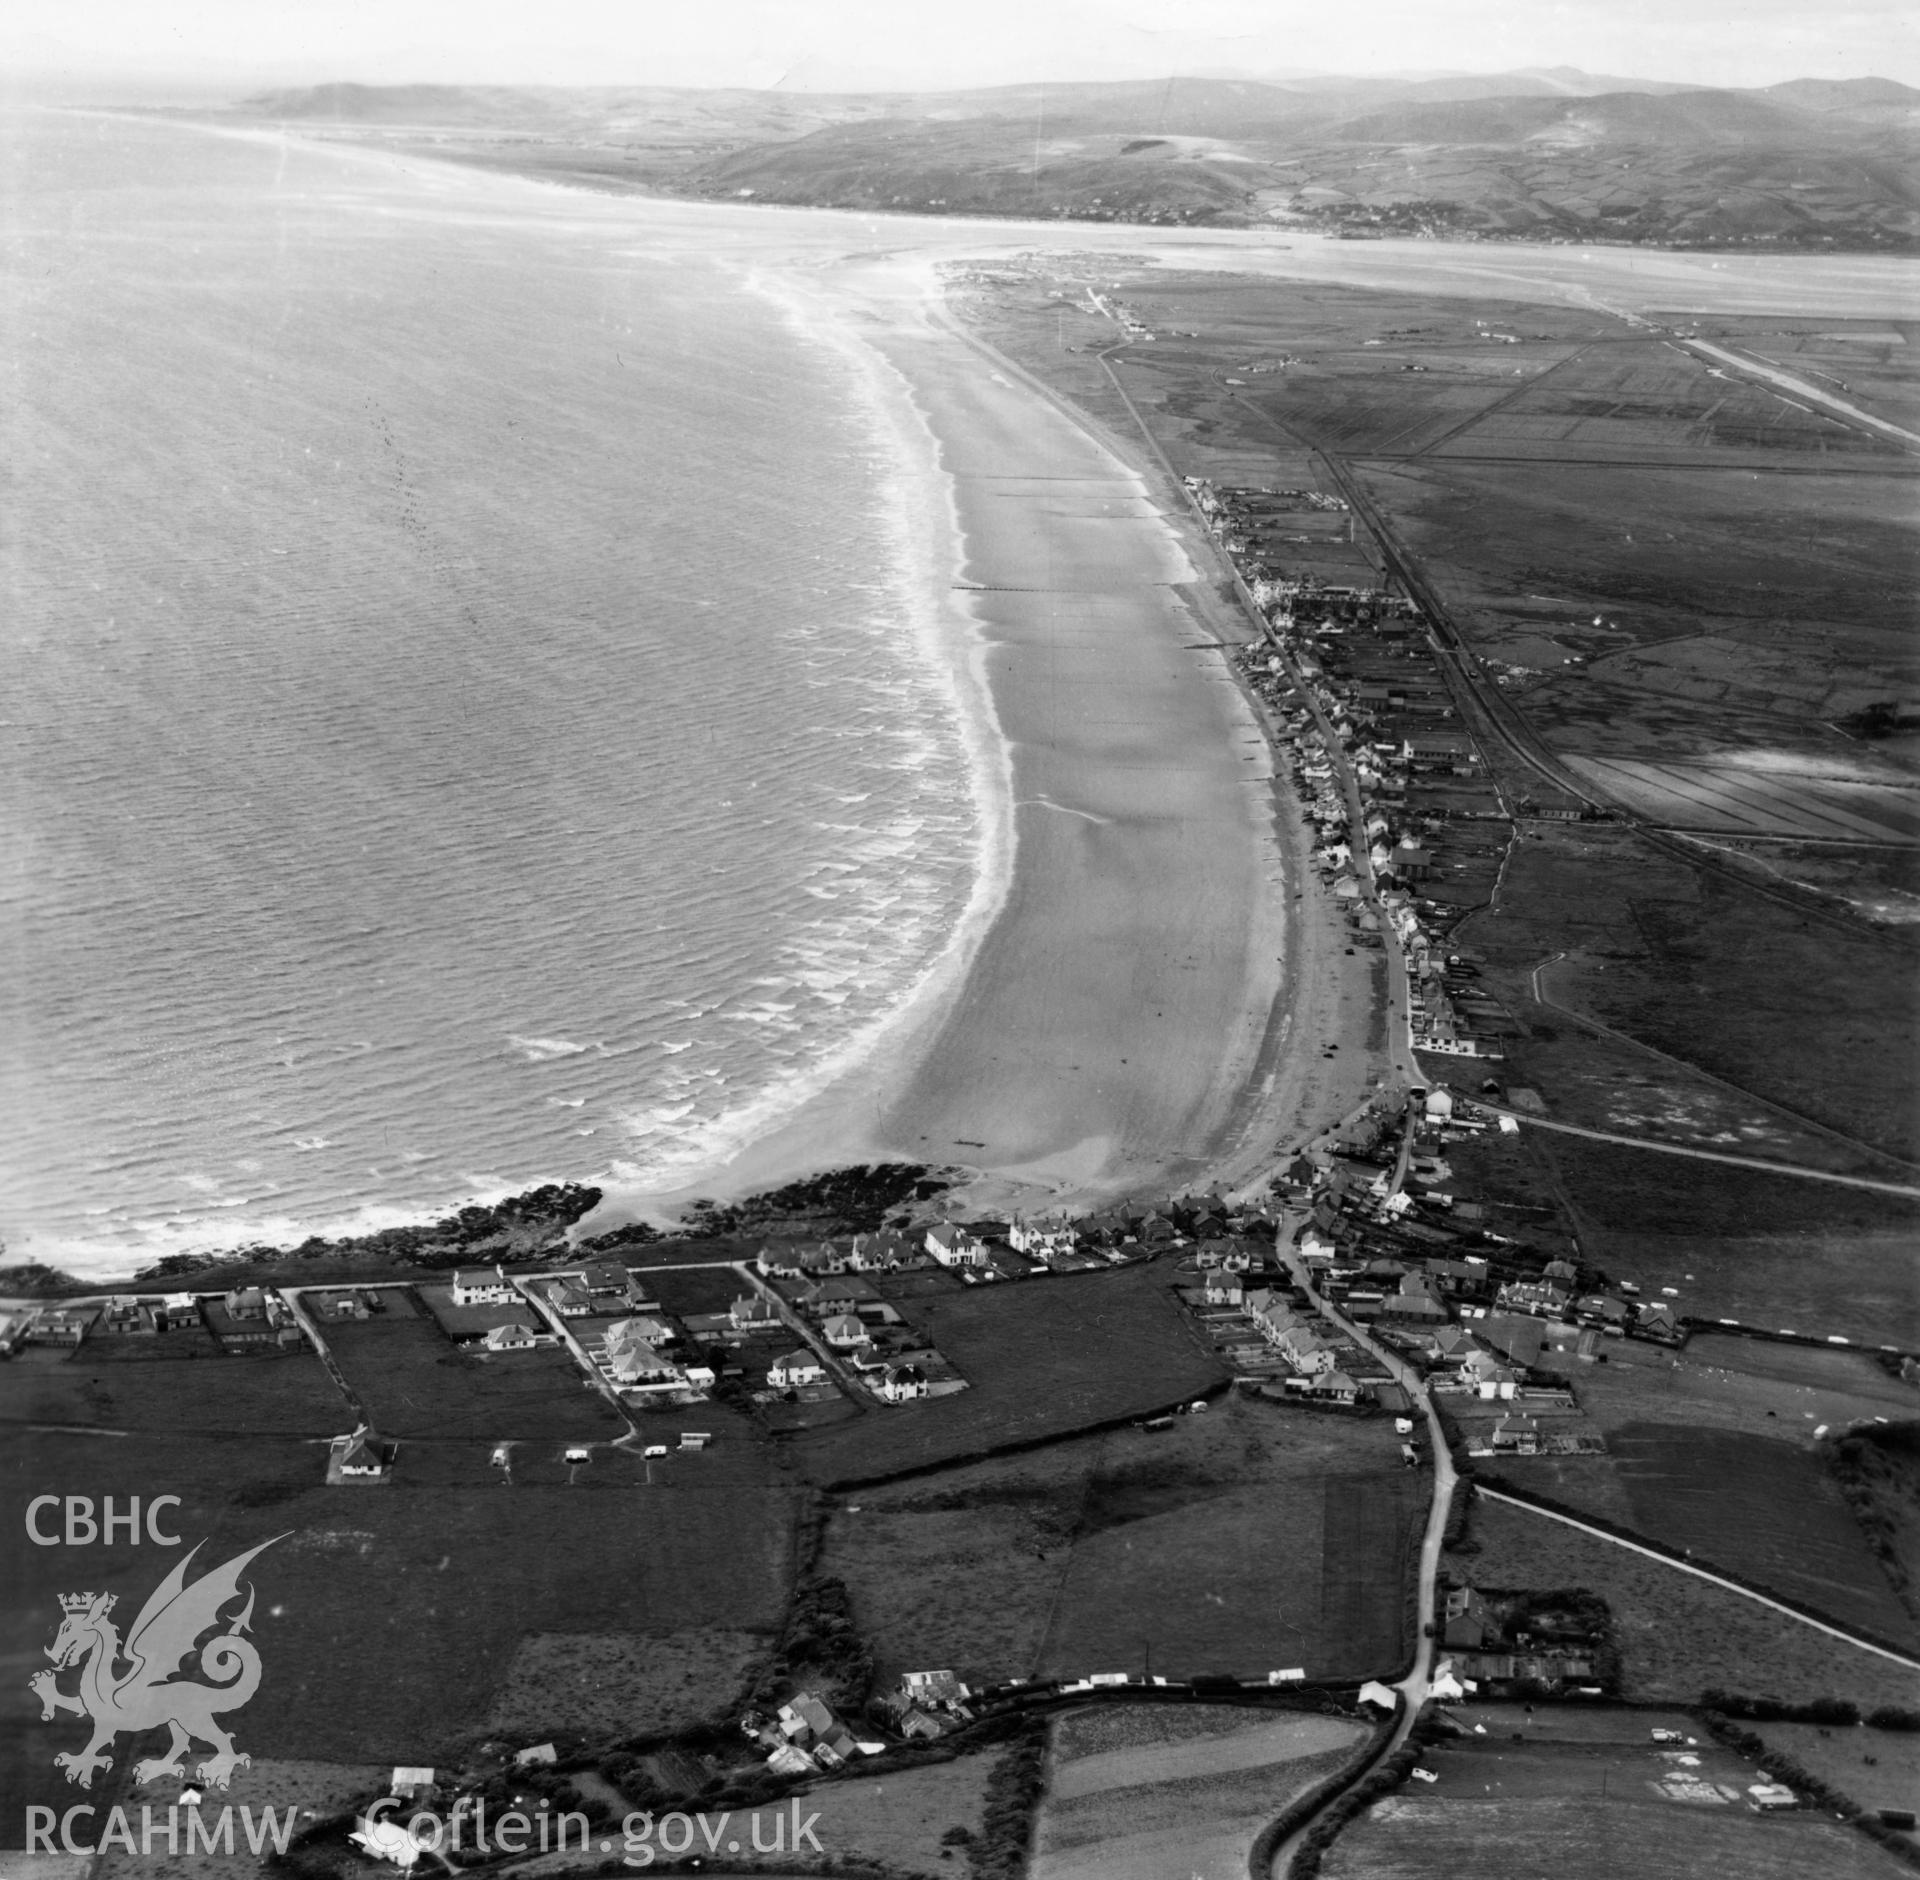 General view of Borth from Upper Borth looking north towards the Dyfi estuary. Oblique aerial photograph, 5?" cut roll film.